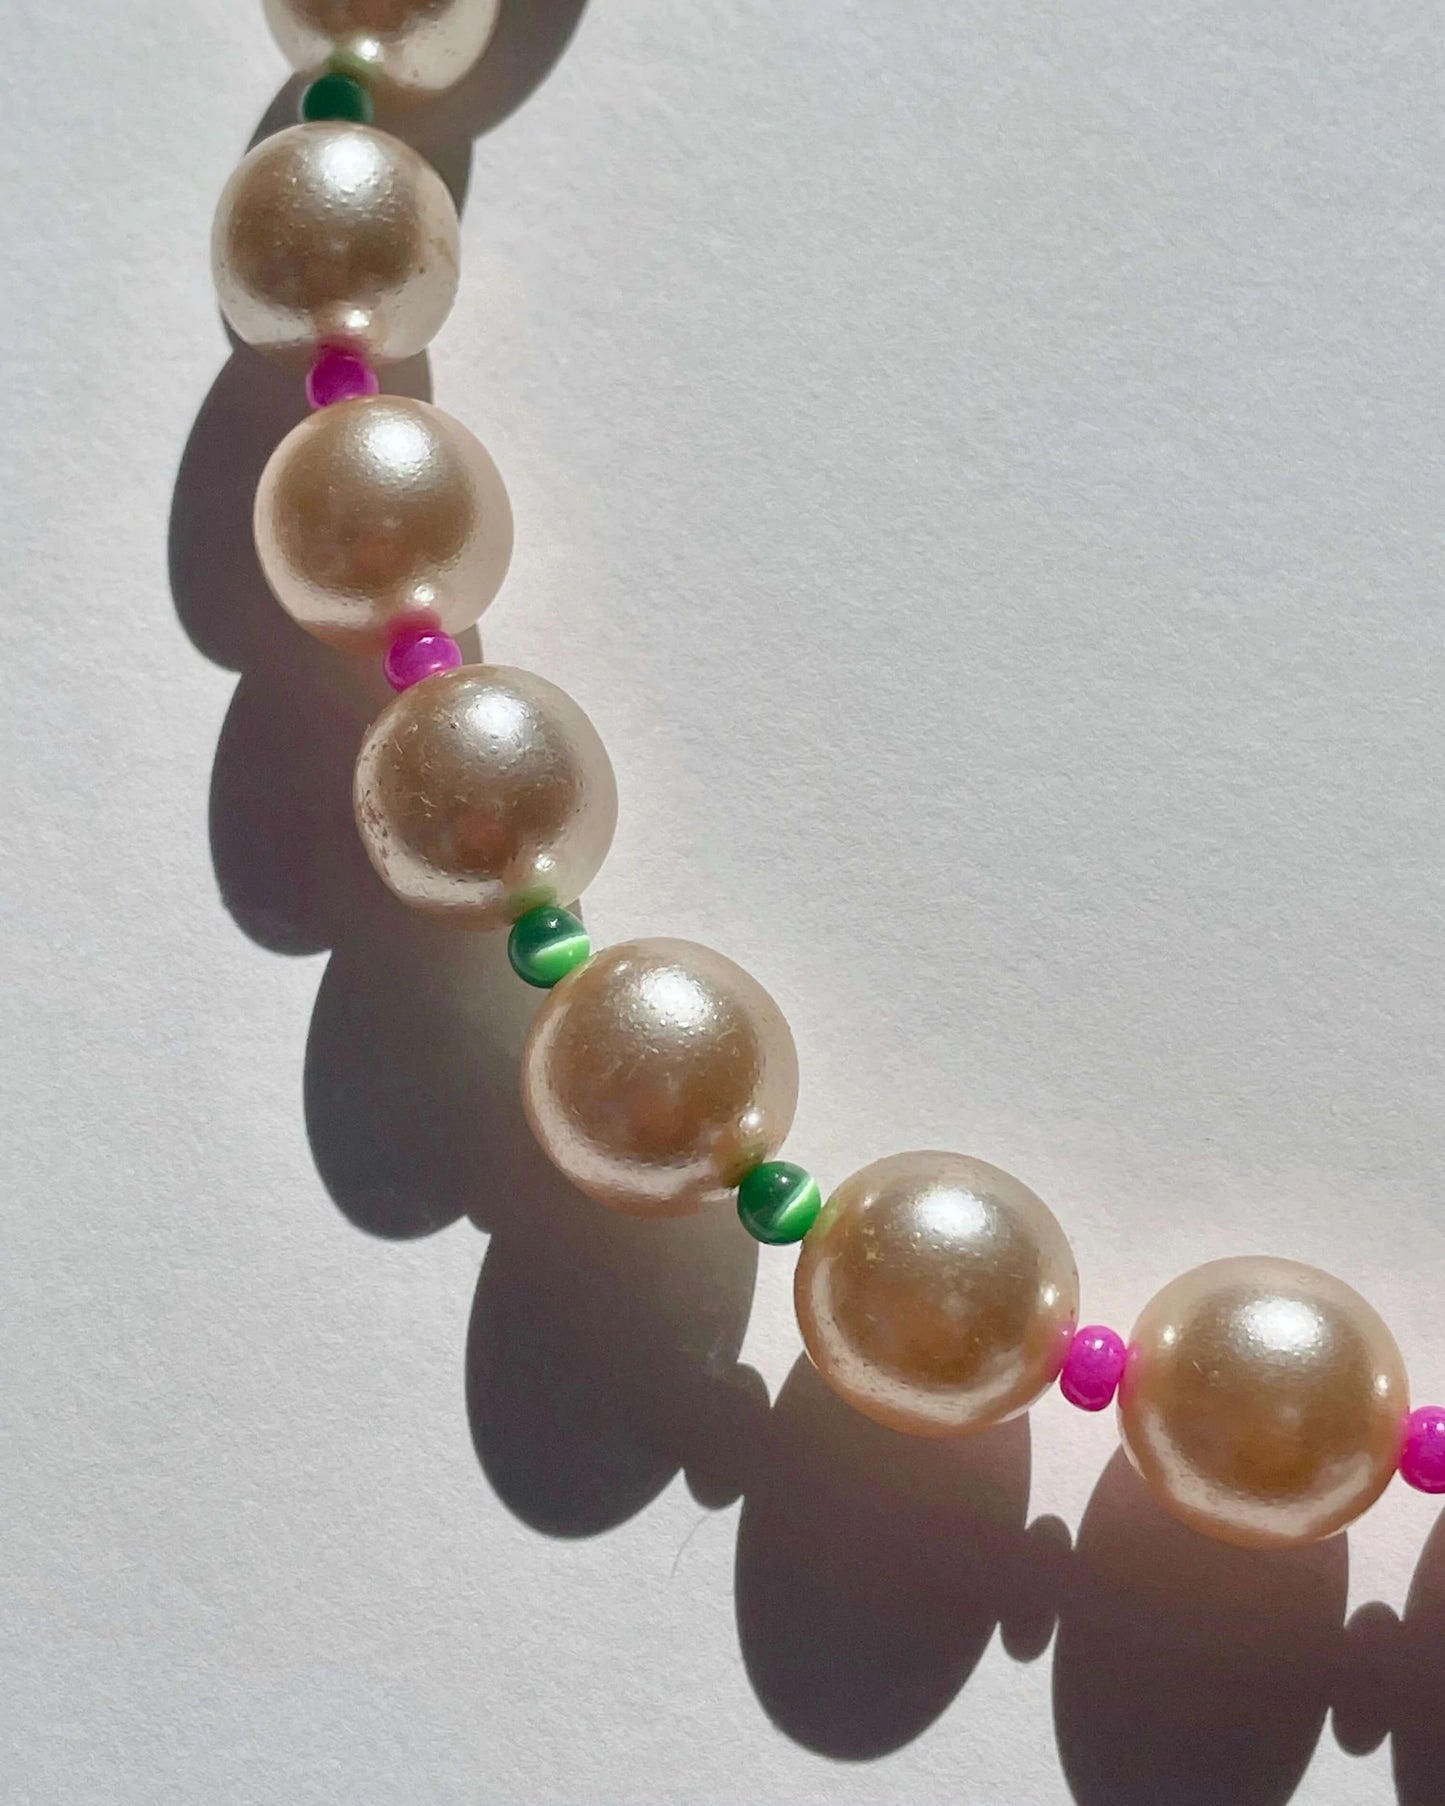 CHUNKY PEARL NECKLACE